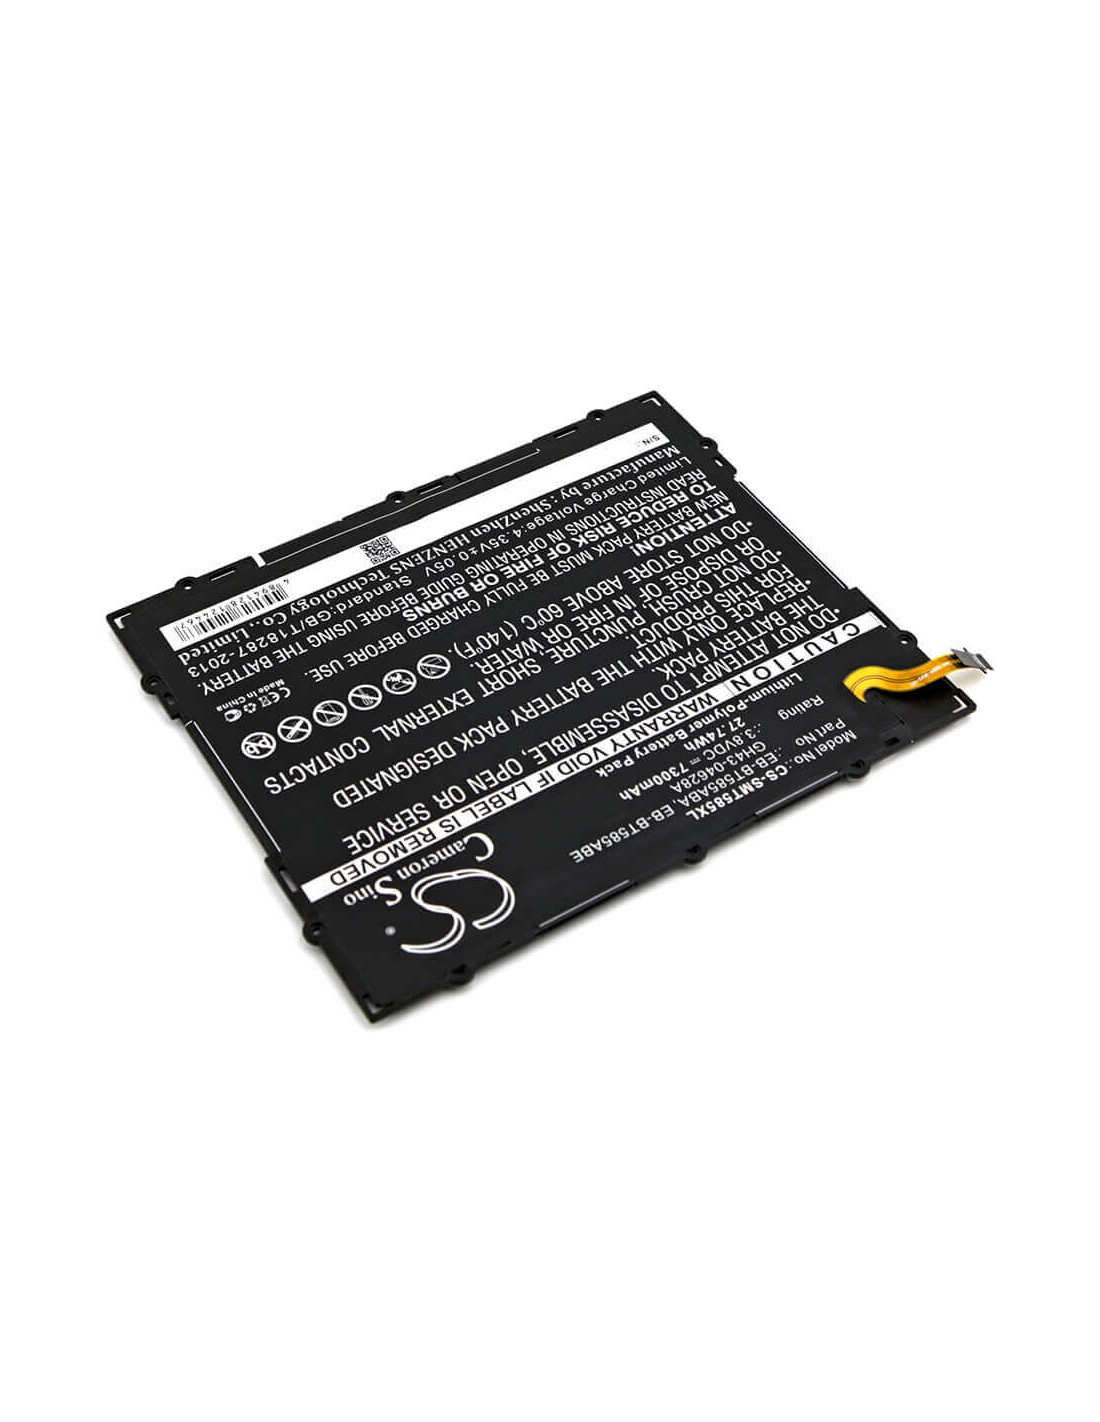 Battery for Samsung, Galaxy Tab A 10.1 2016 Td-lte 3.8V, 7300mAh - 27.74Wh